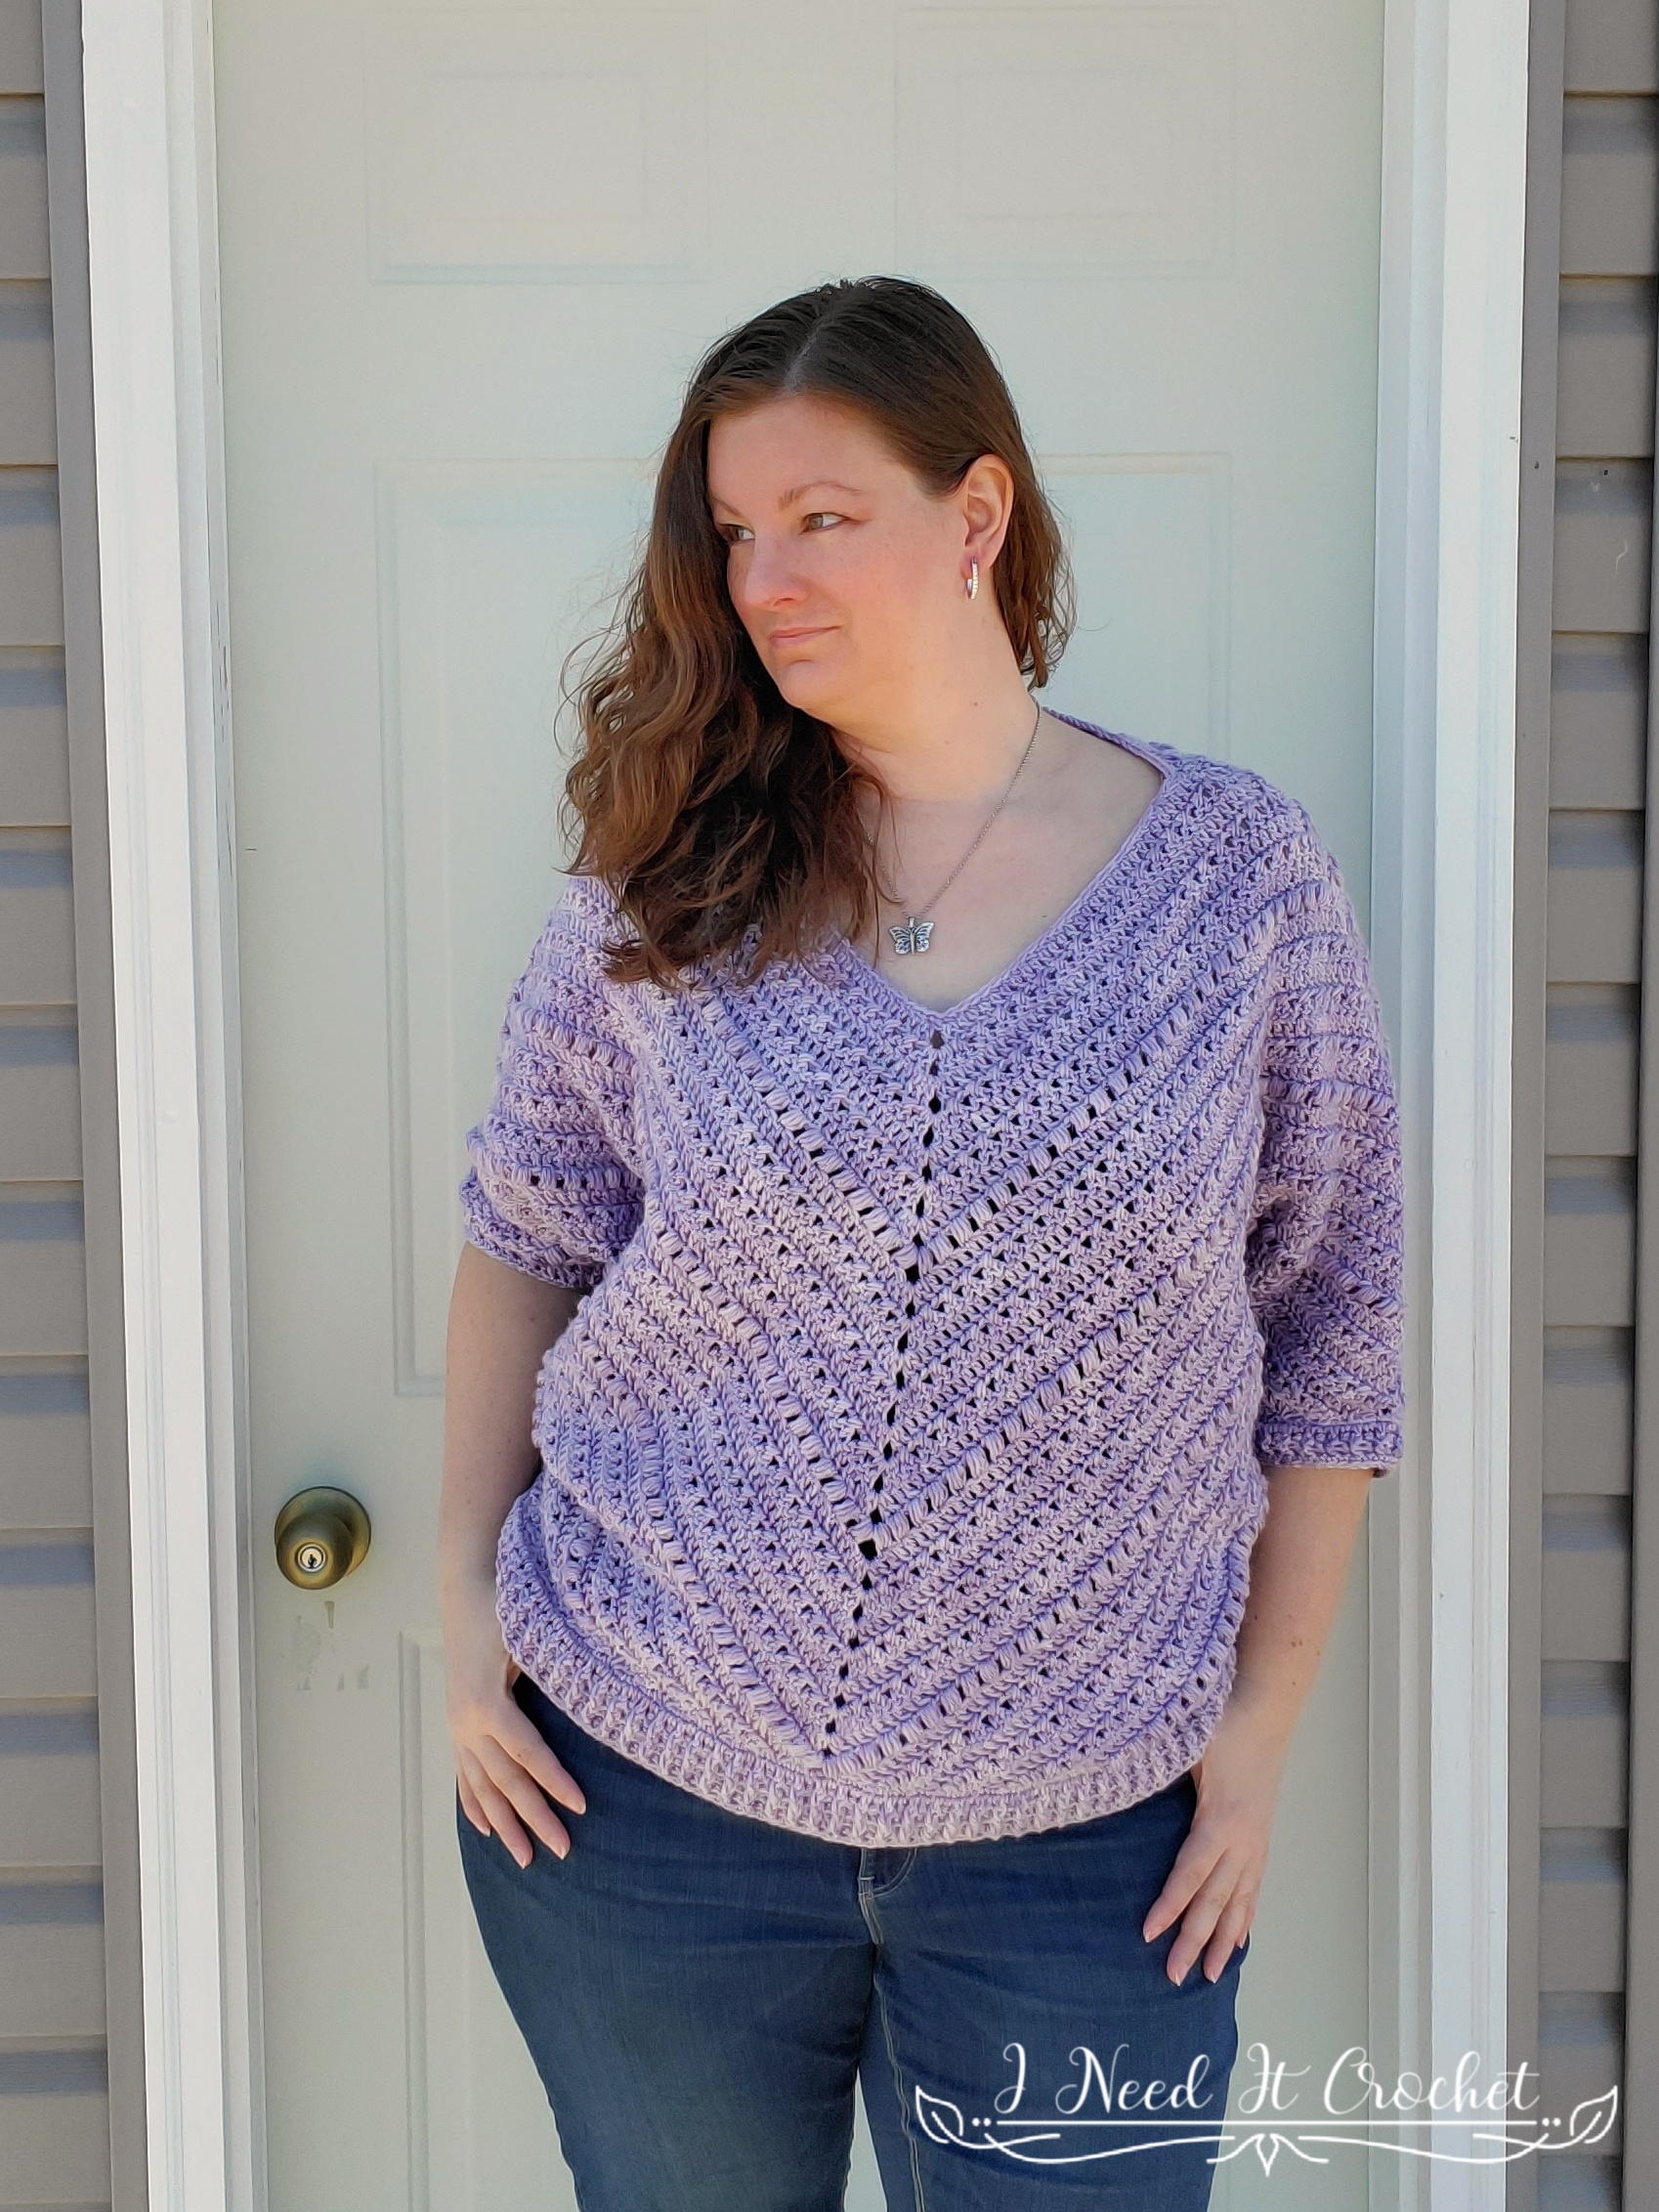 Sum Of Its Parts Pullover - Free Crochet Pattern · I Need It Crochet ...